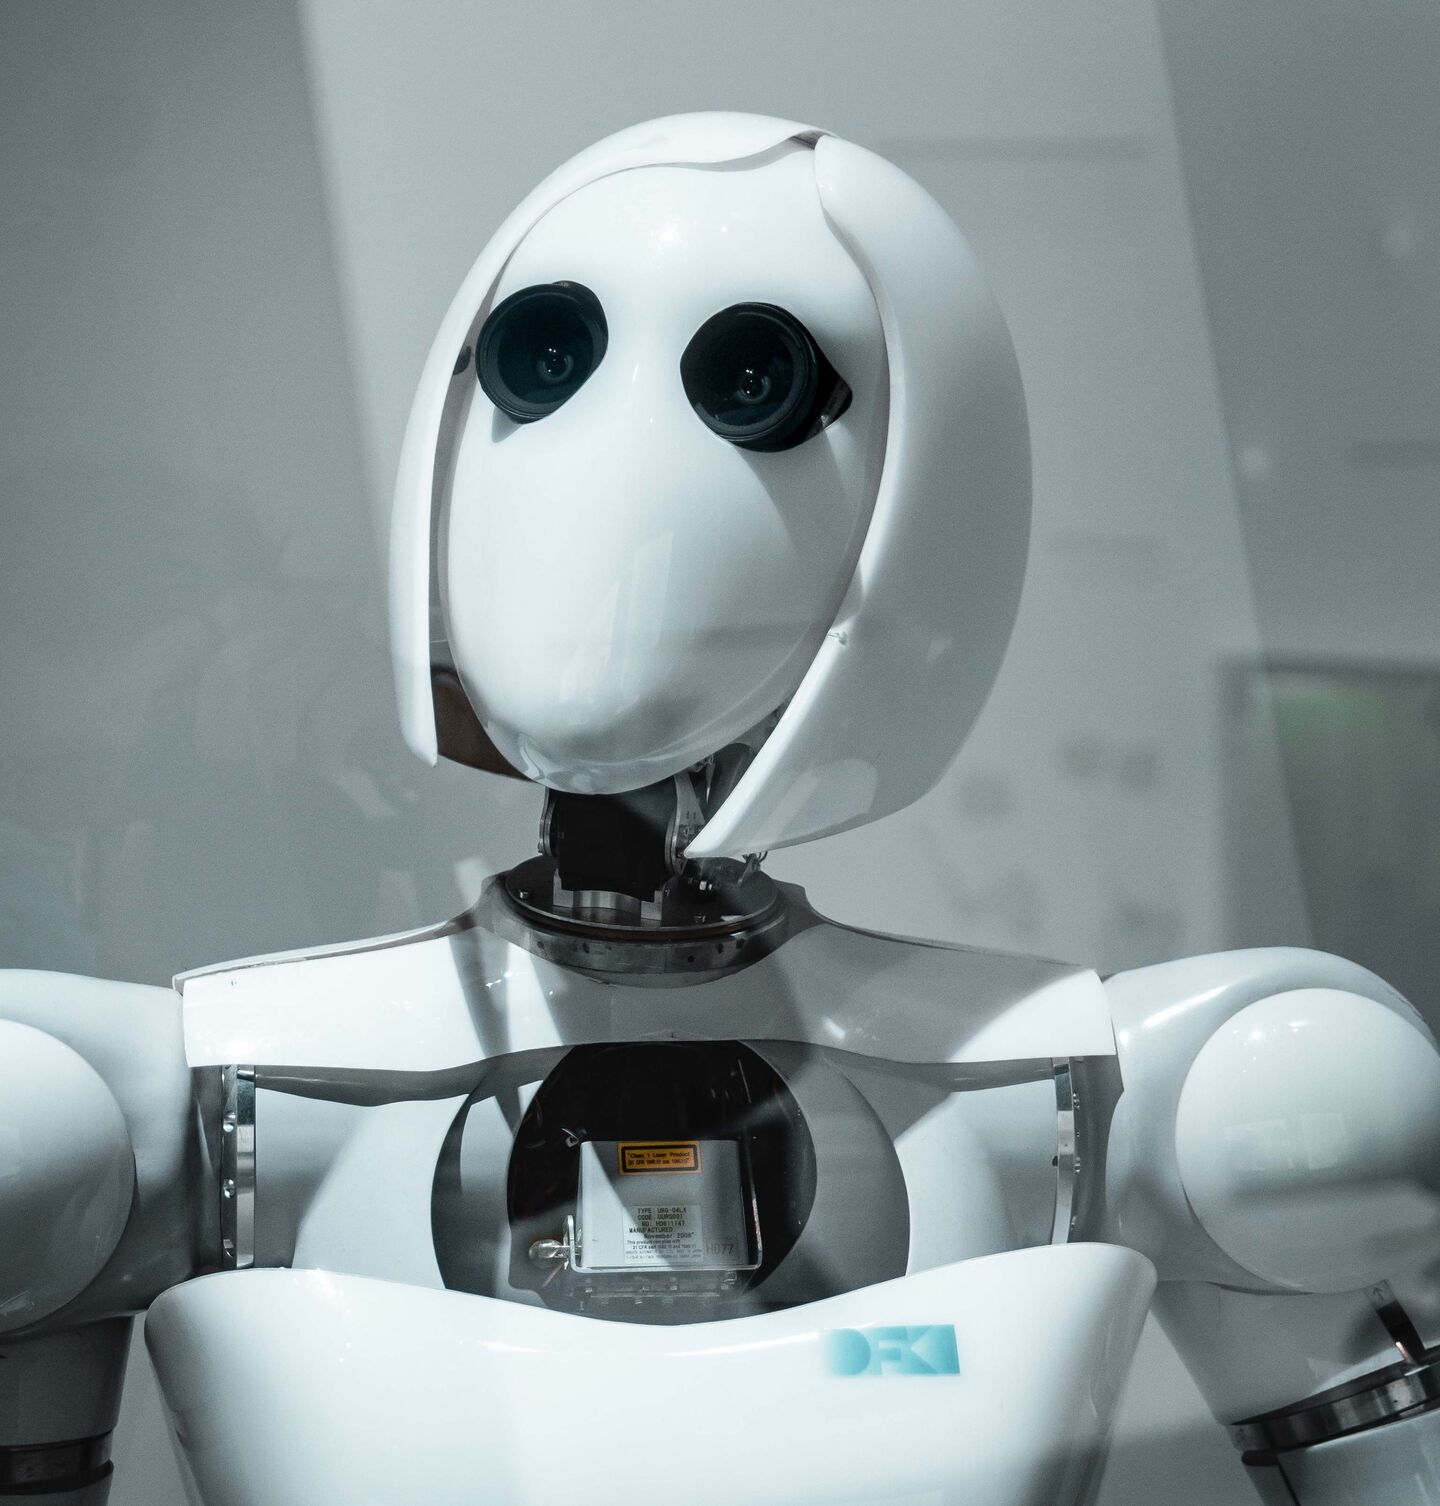 Image showing a white cute robot with huge eyes